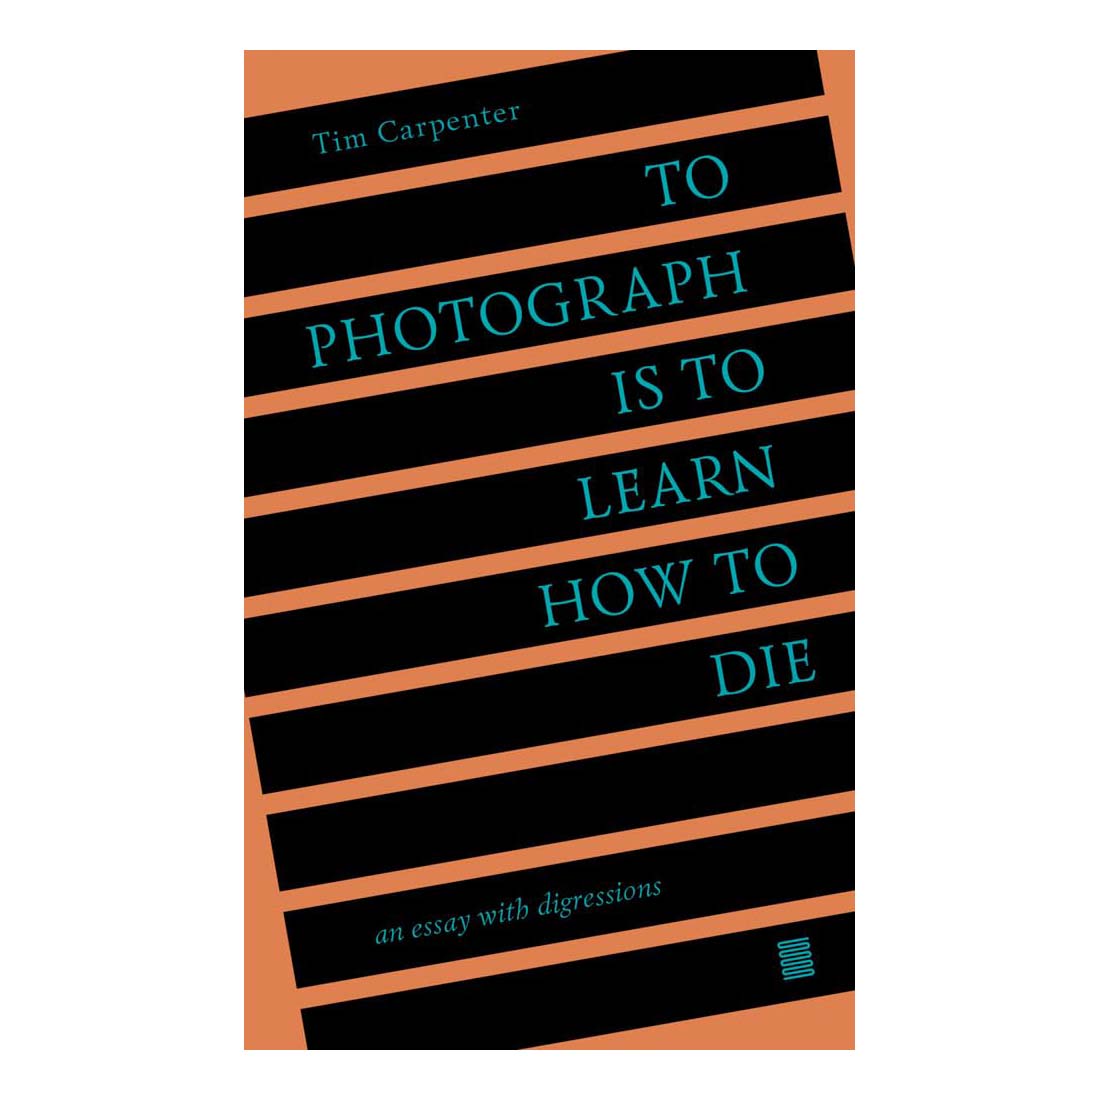 To Photograph is to Learn How To Die